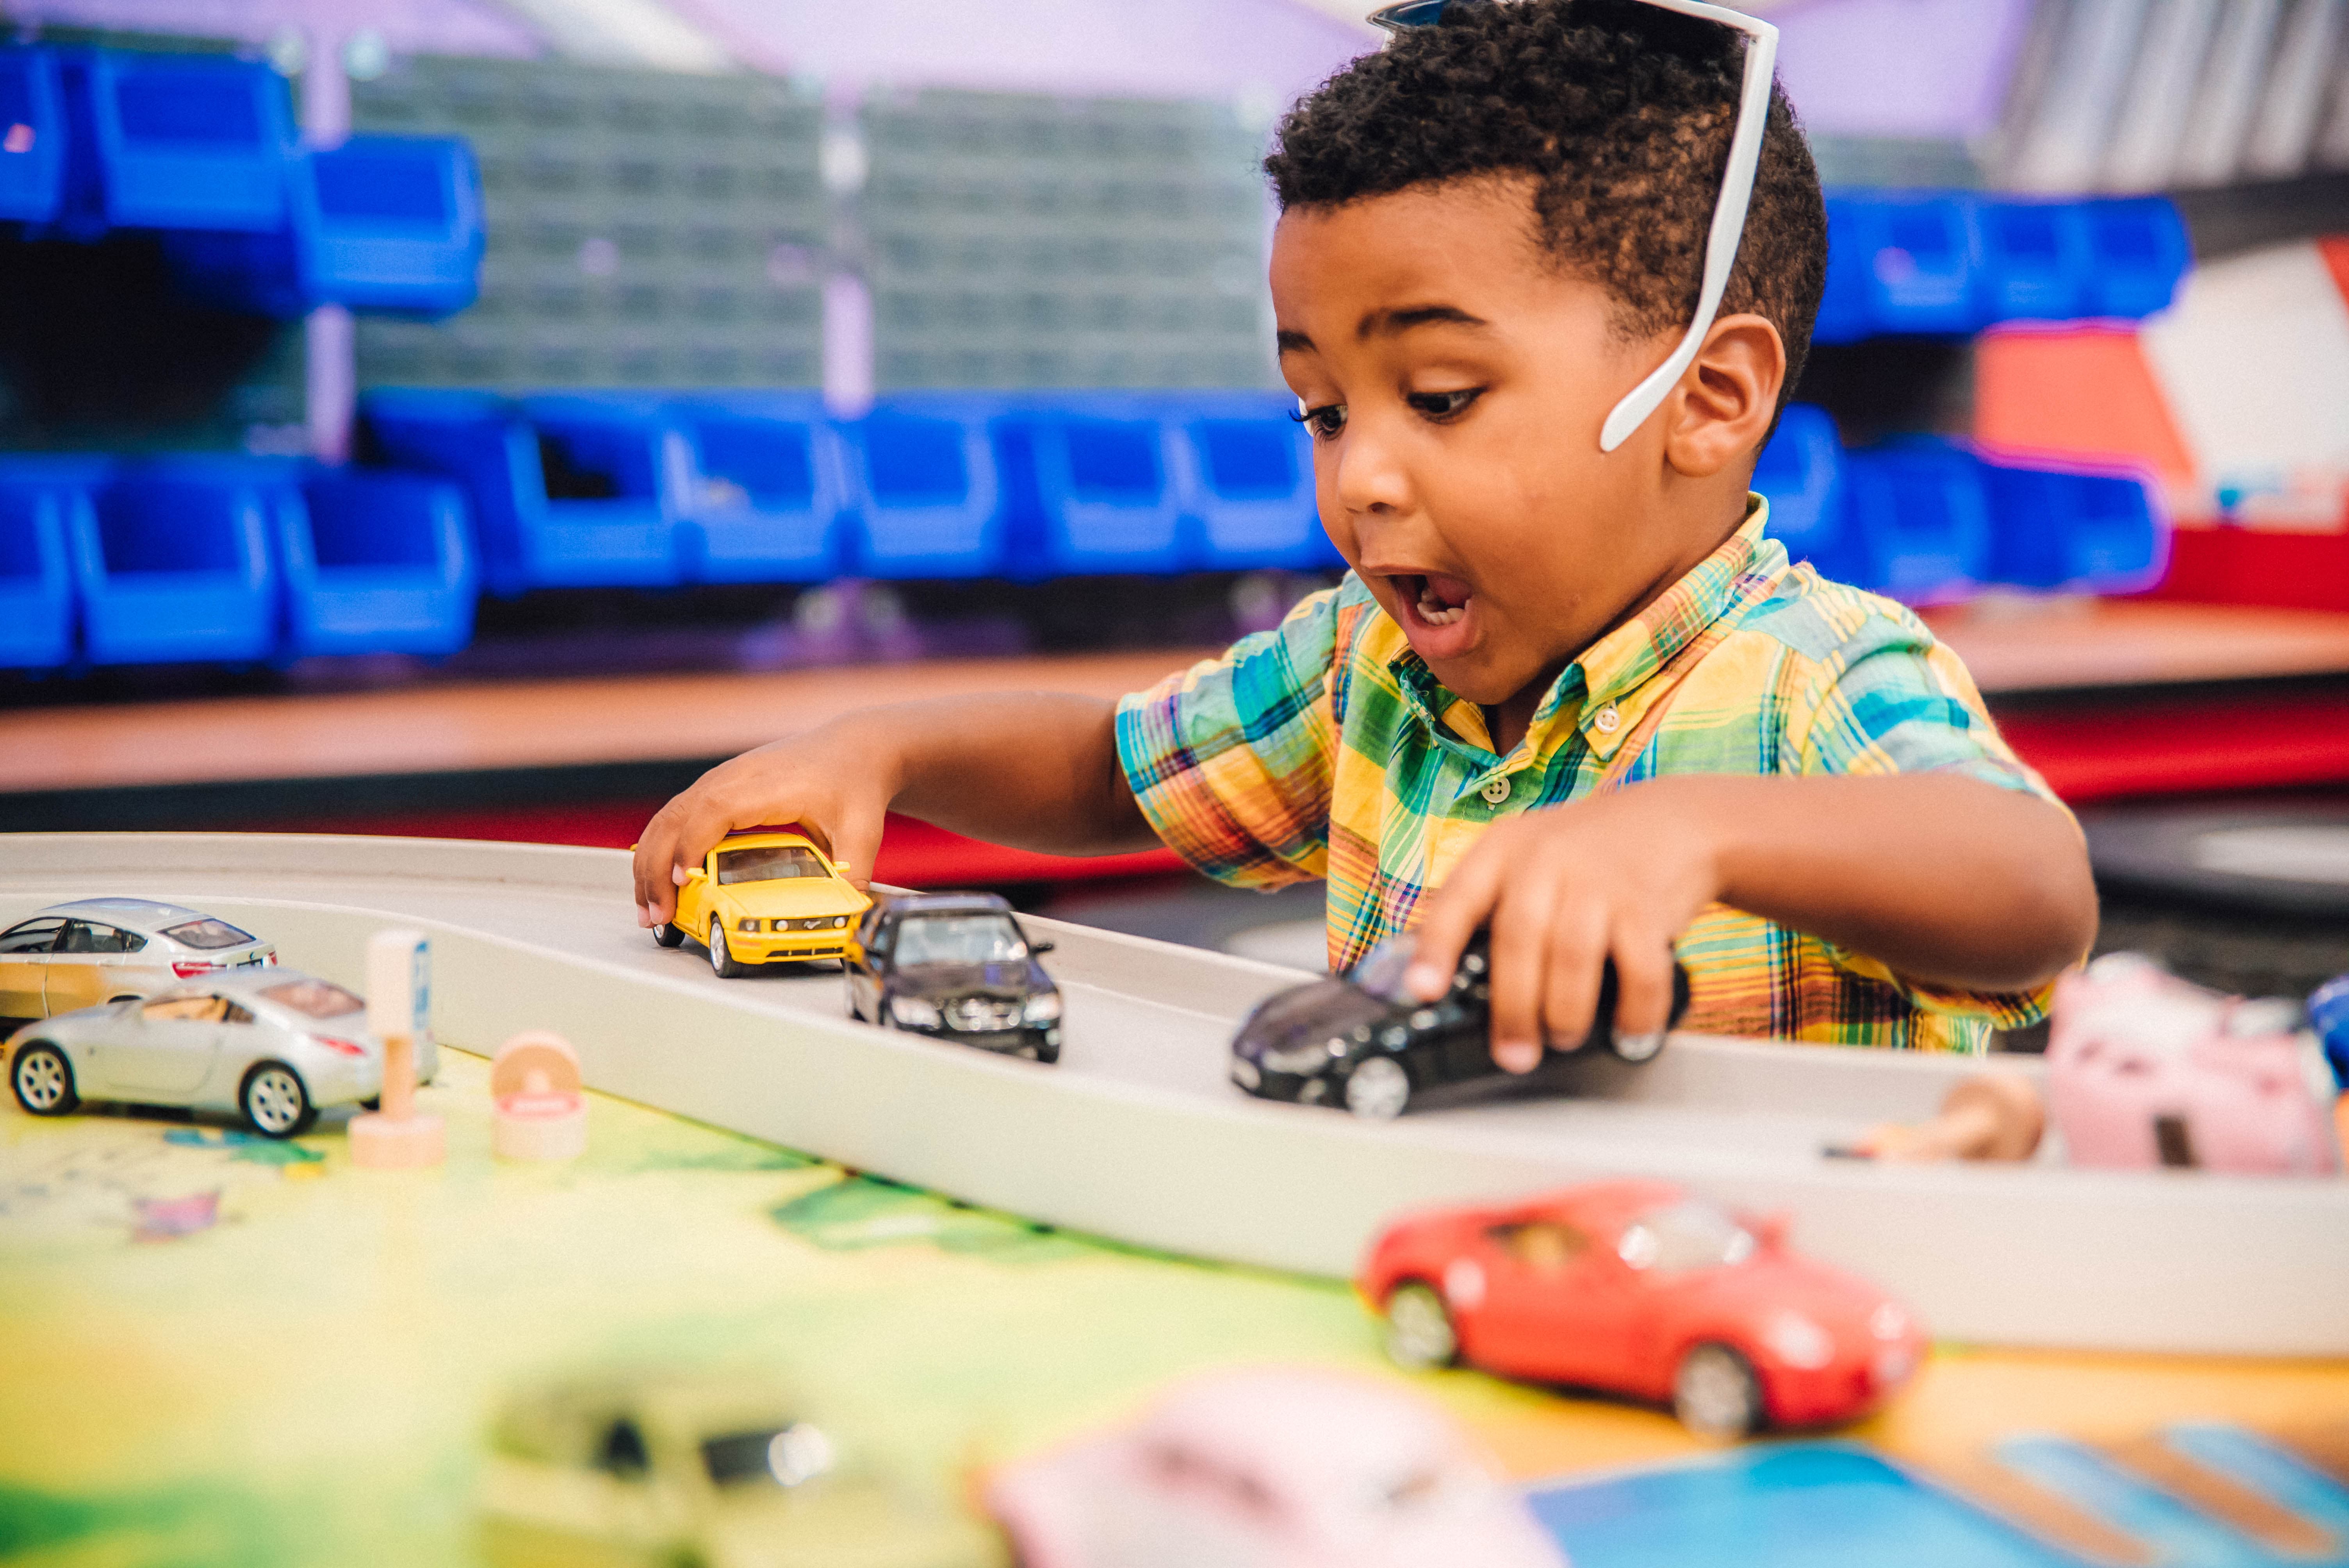 A young boy playing with toy cars